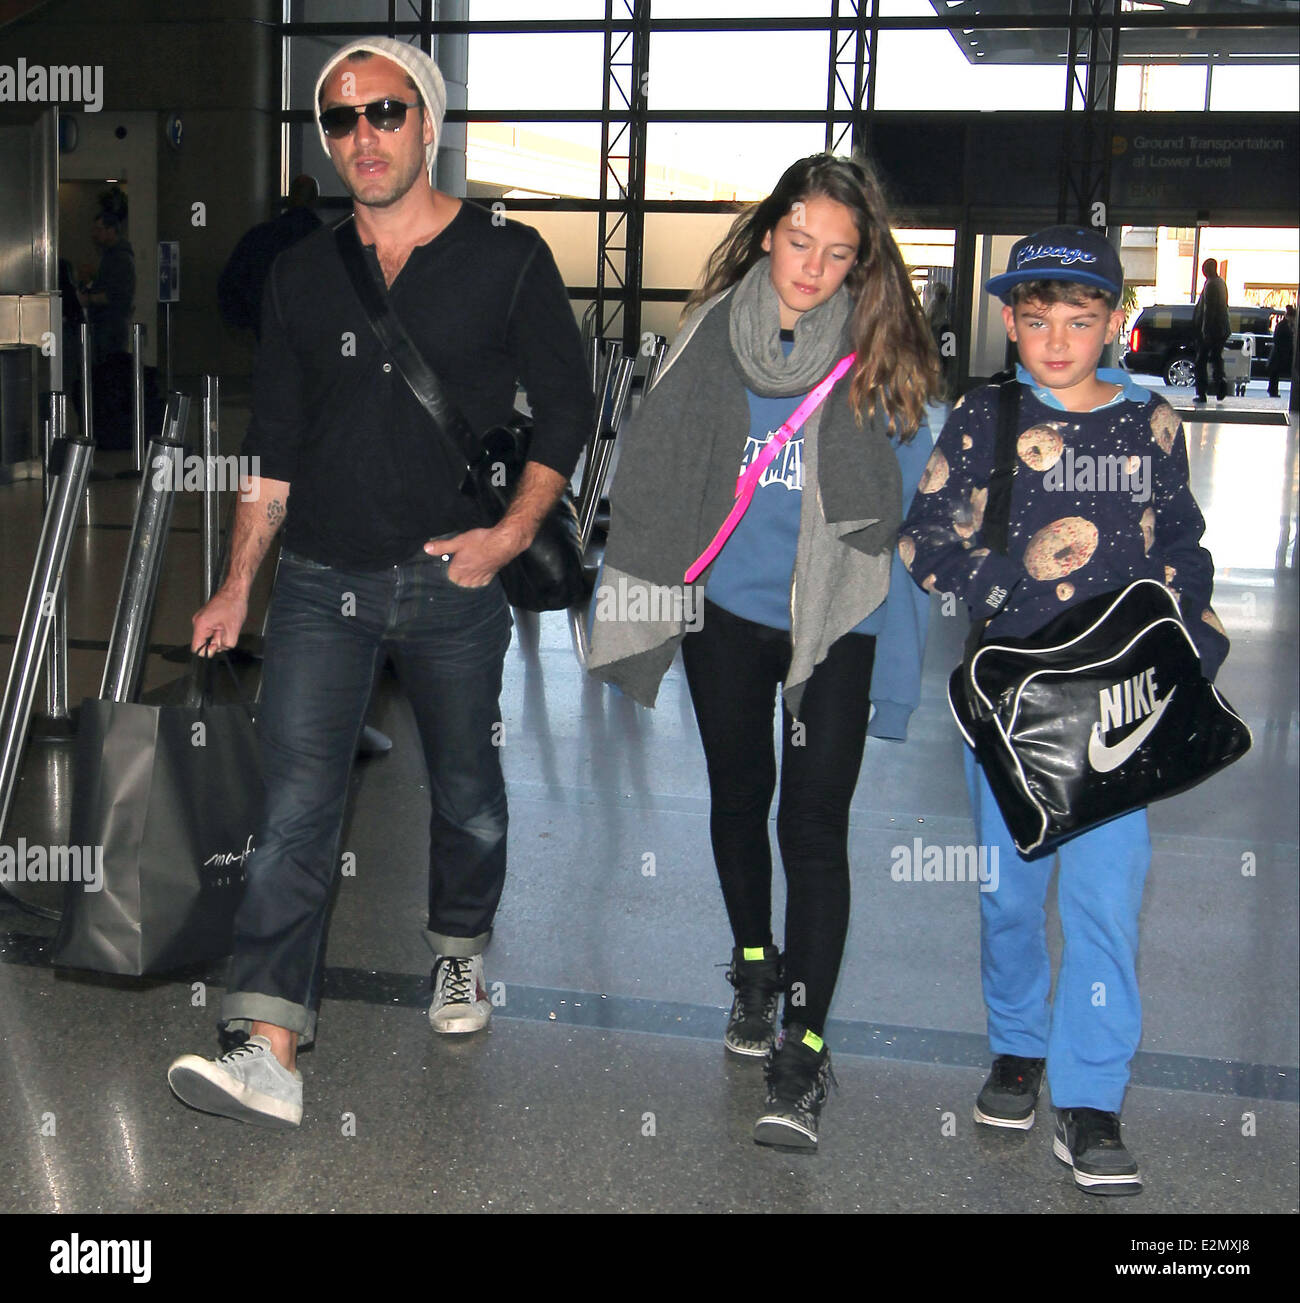 Jude Law with his daughter Iris and son Rudy arrive at Los Angeles  International Airport, LAX looking tanned and relaxed after their holiday  Featuring: Jude Law,Iris Law,Rudy Law Where: Los Angeles, California,